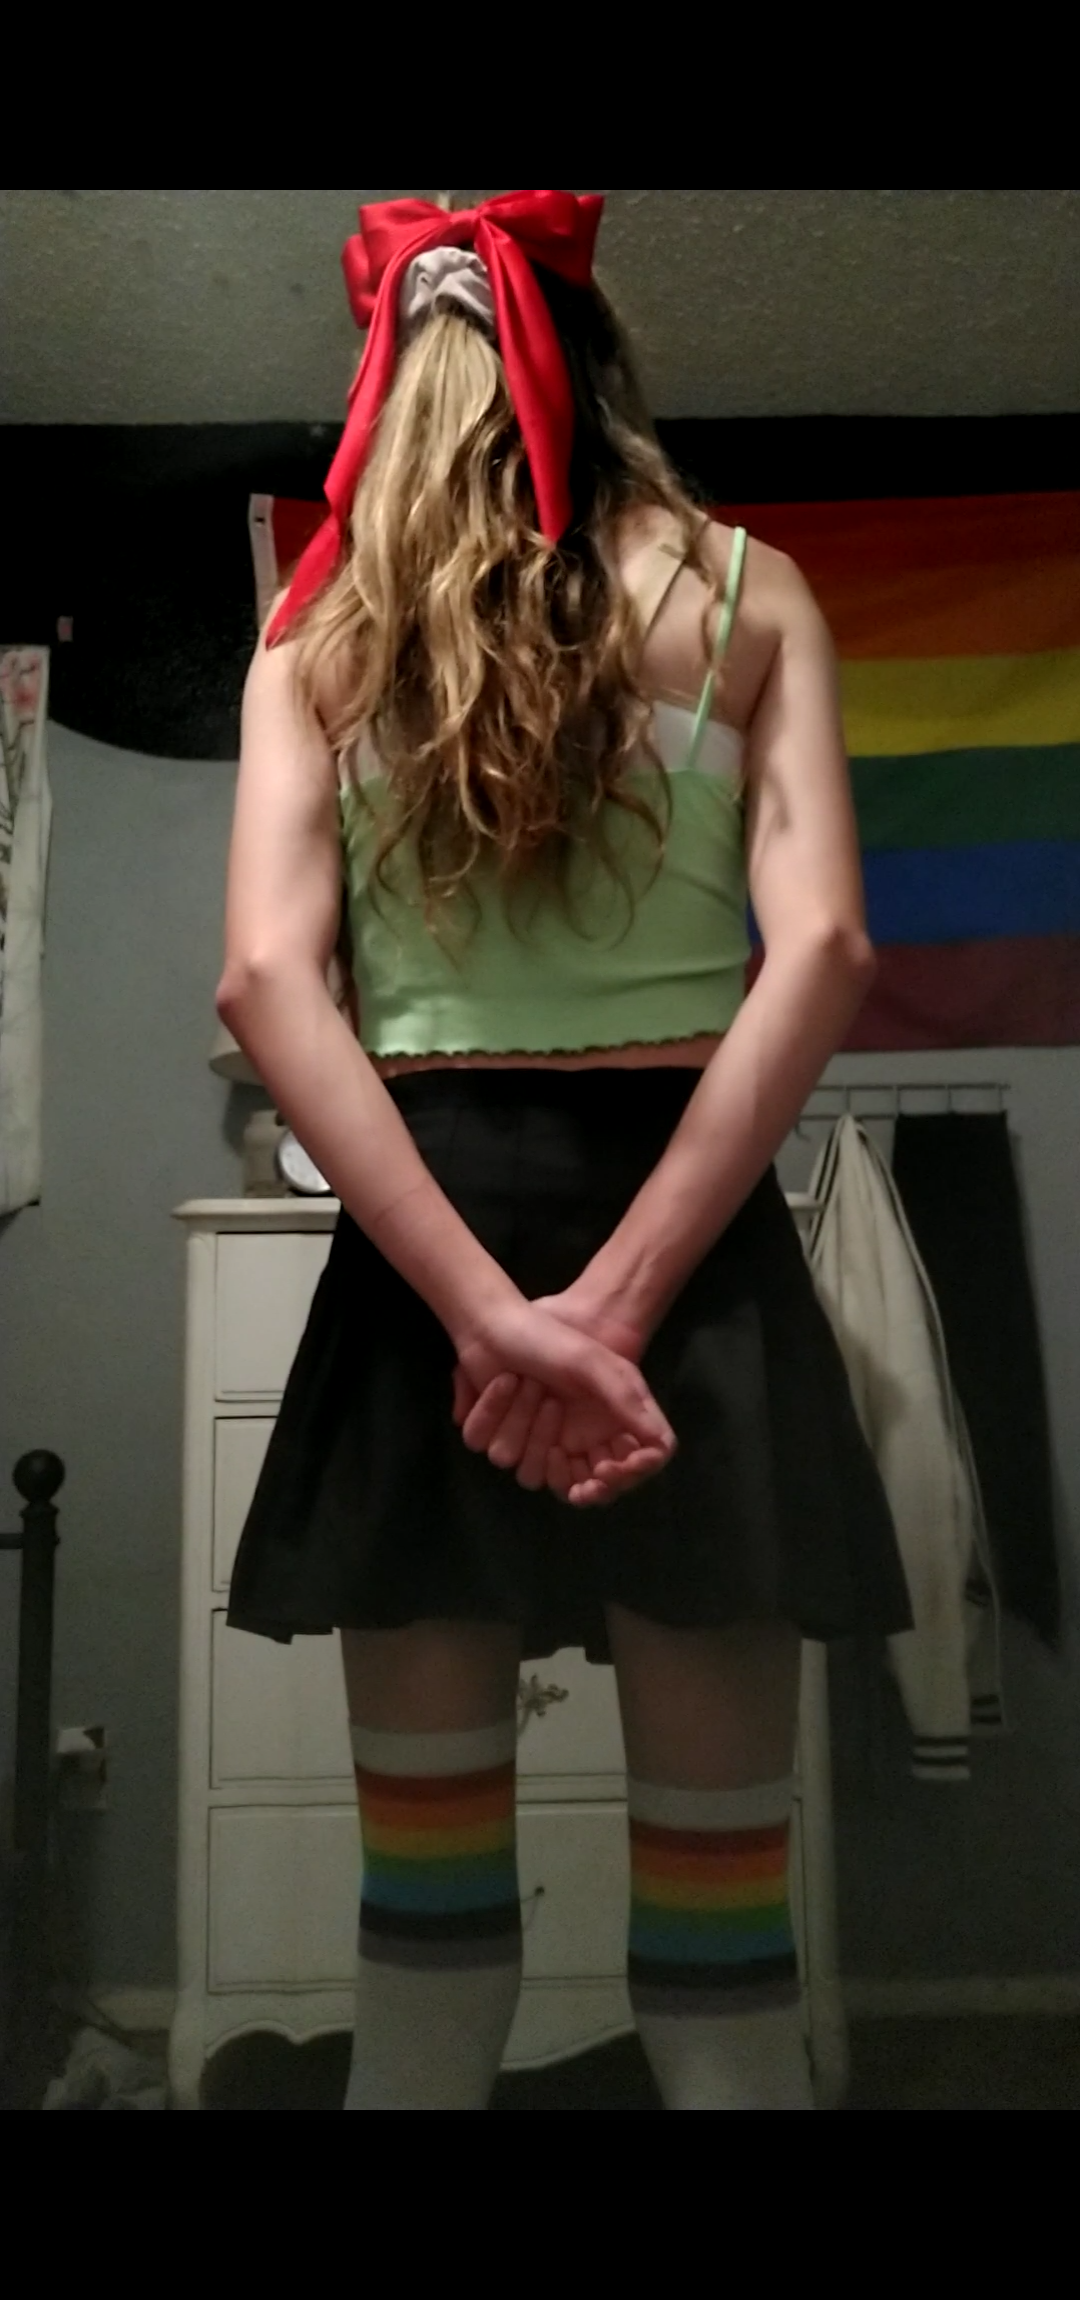 Me wearing a cute, small, green tank top along with a black skirt. Red ribbon in my hair. Facing away from camera.